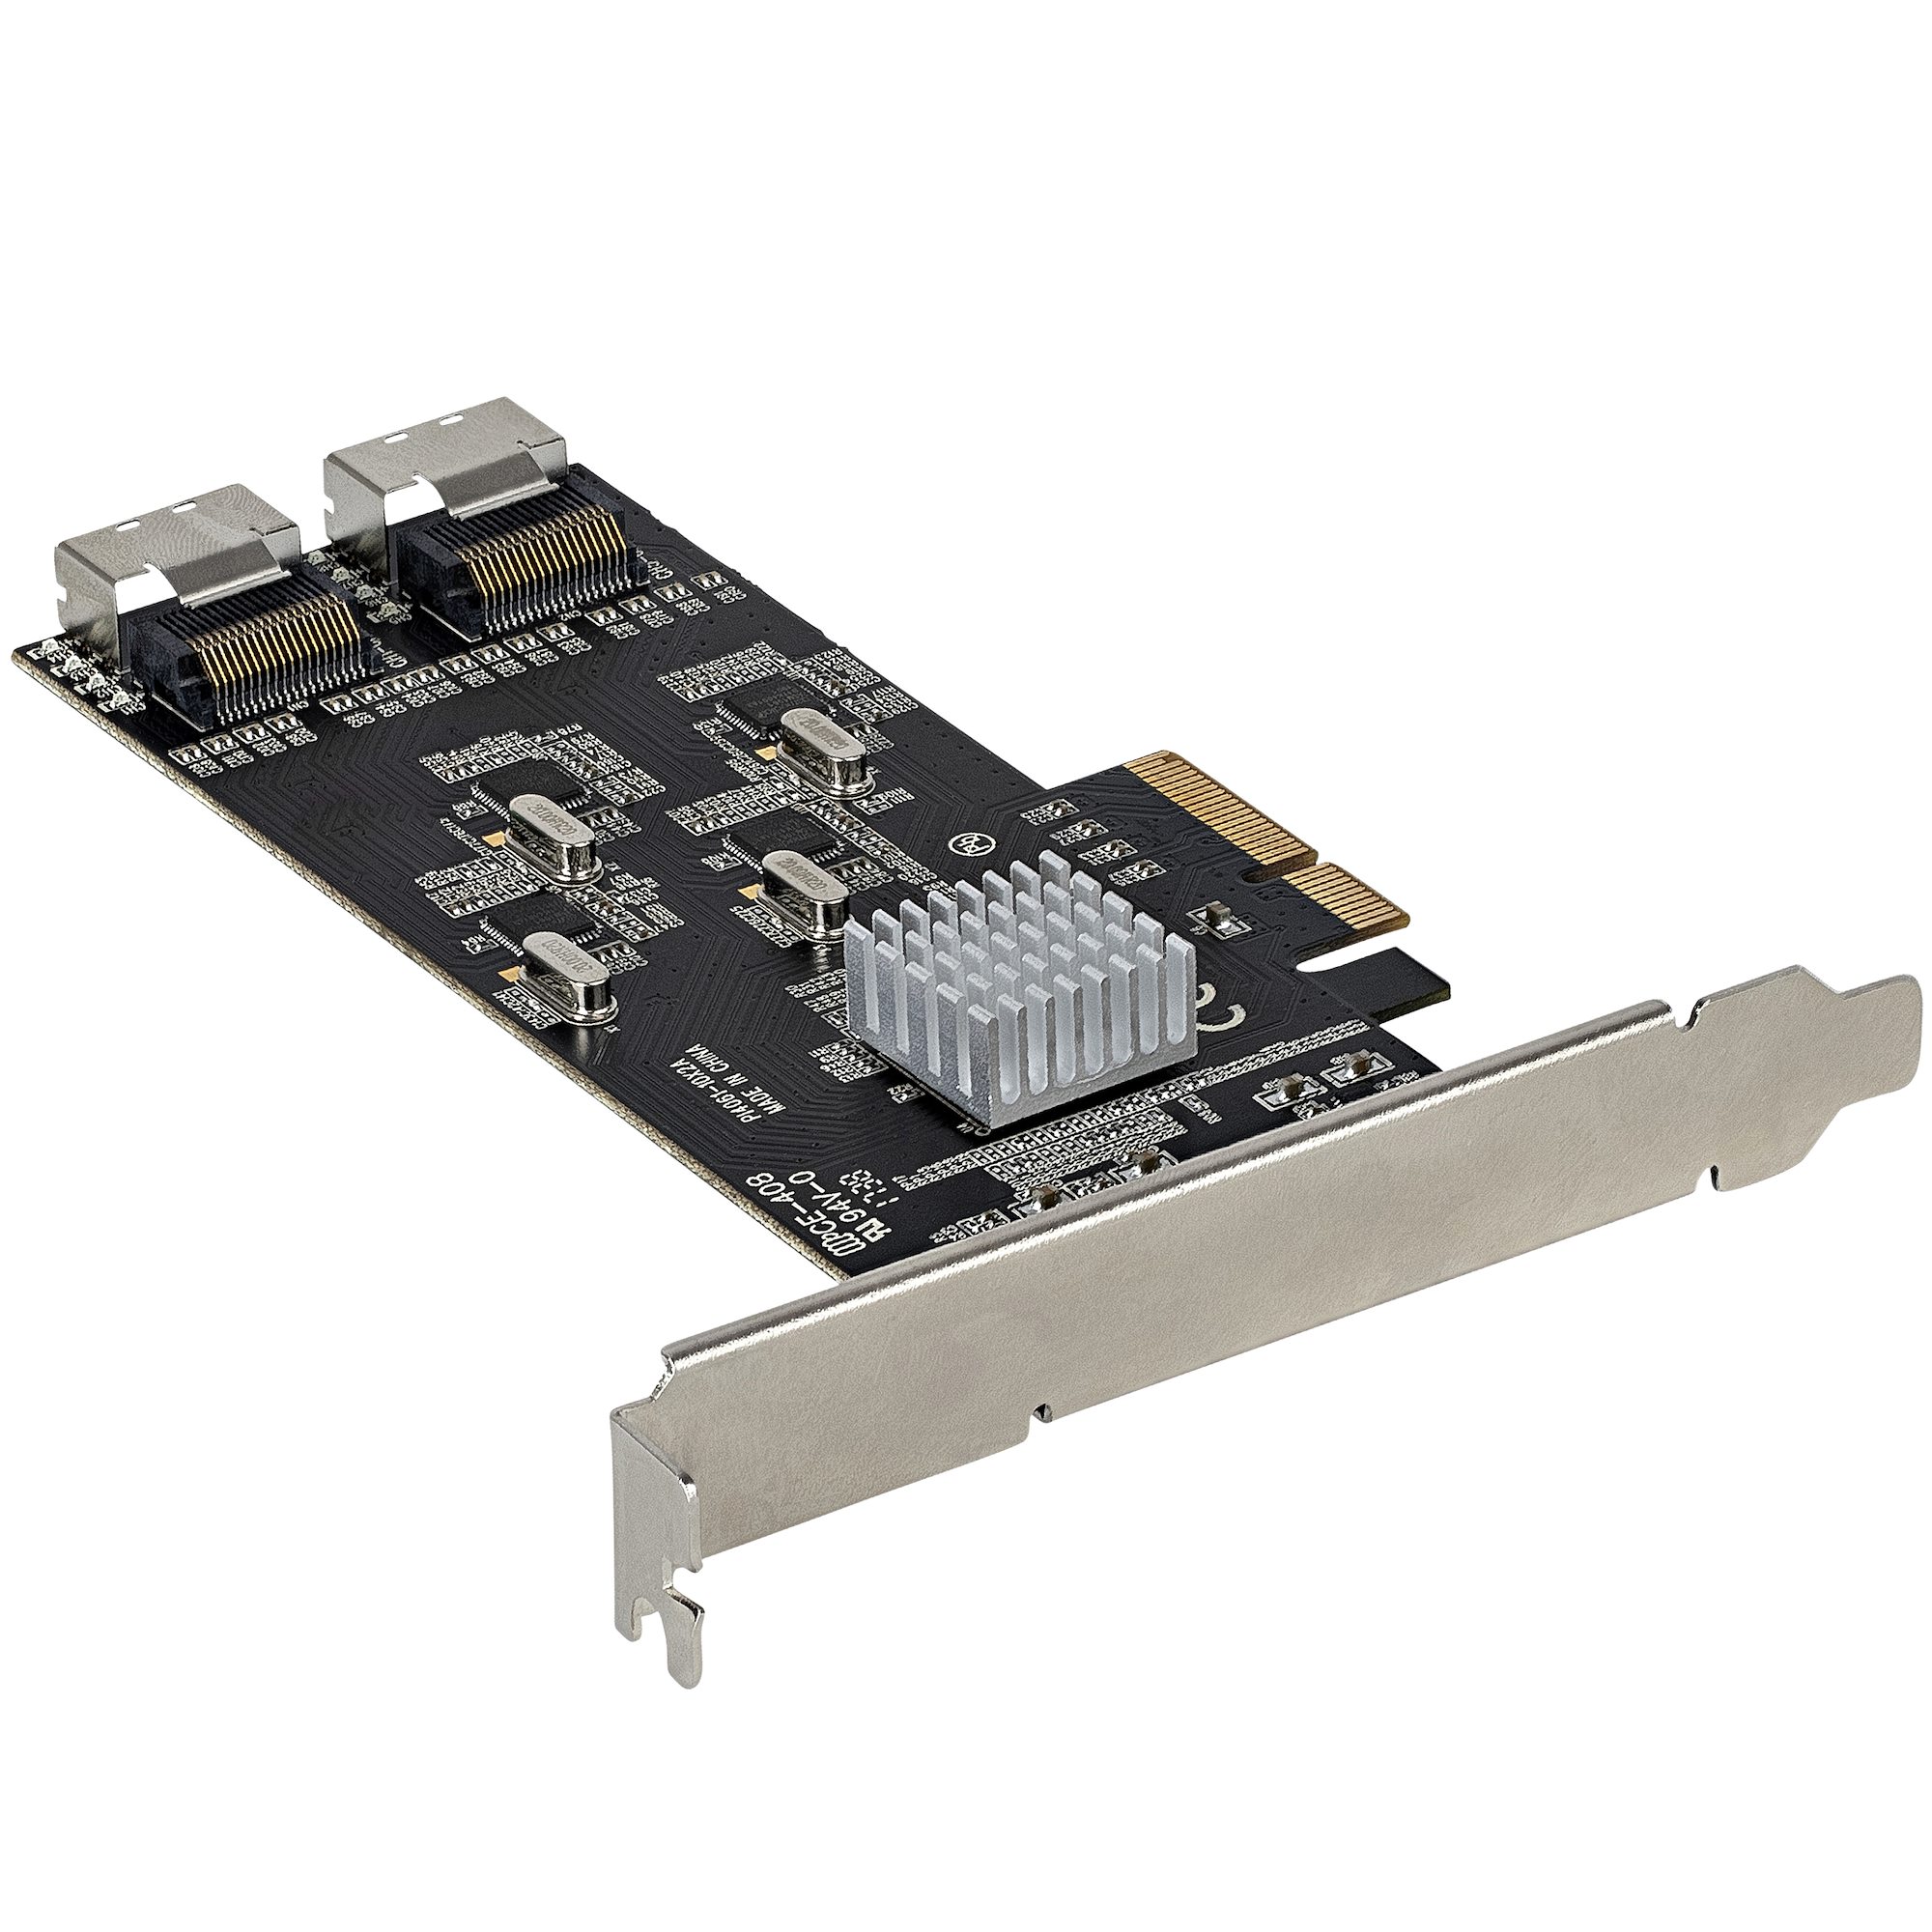 8 Port SATA PCIe Card - PCI Express 6Gbps SATA Expansion Adapter Card with  4 Host Controllers - SATA PCIe Controller Card - PCI-e x4 Gen 2 to SATA III  